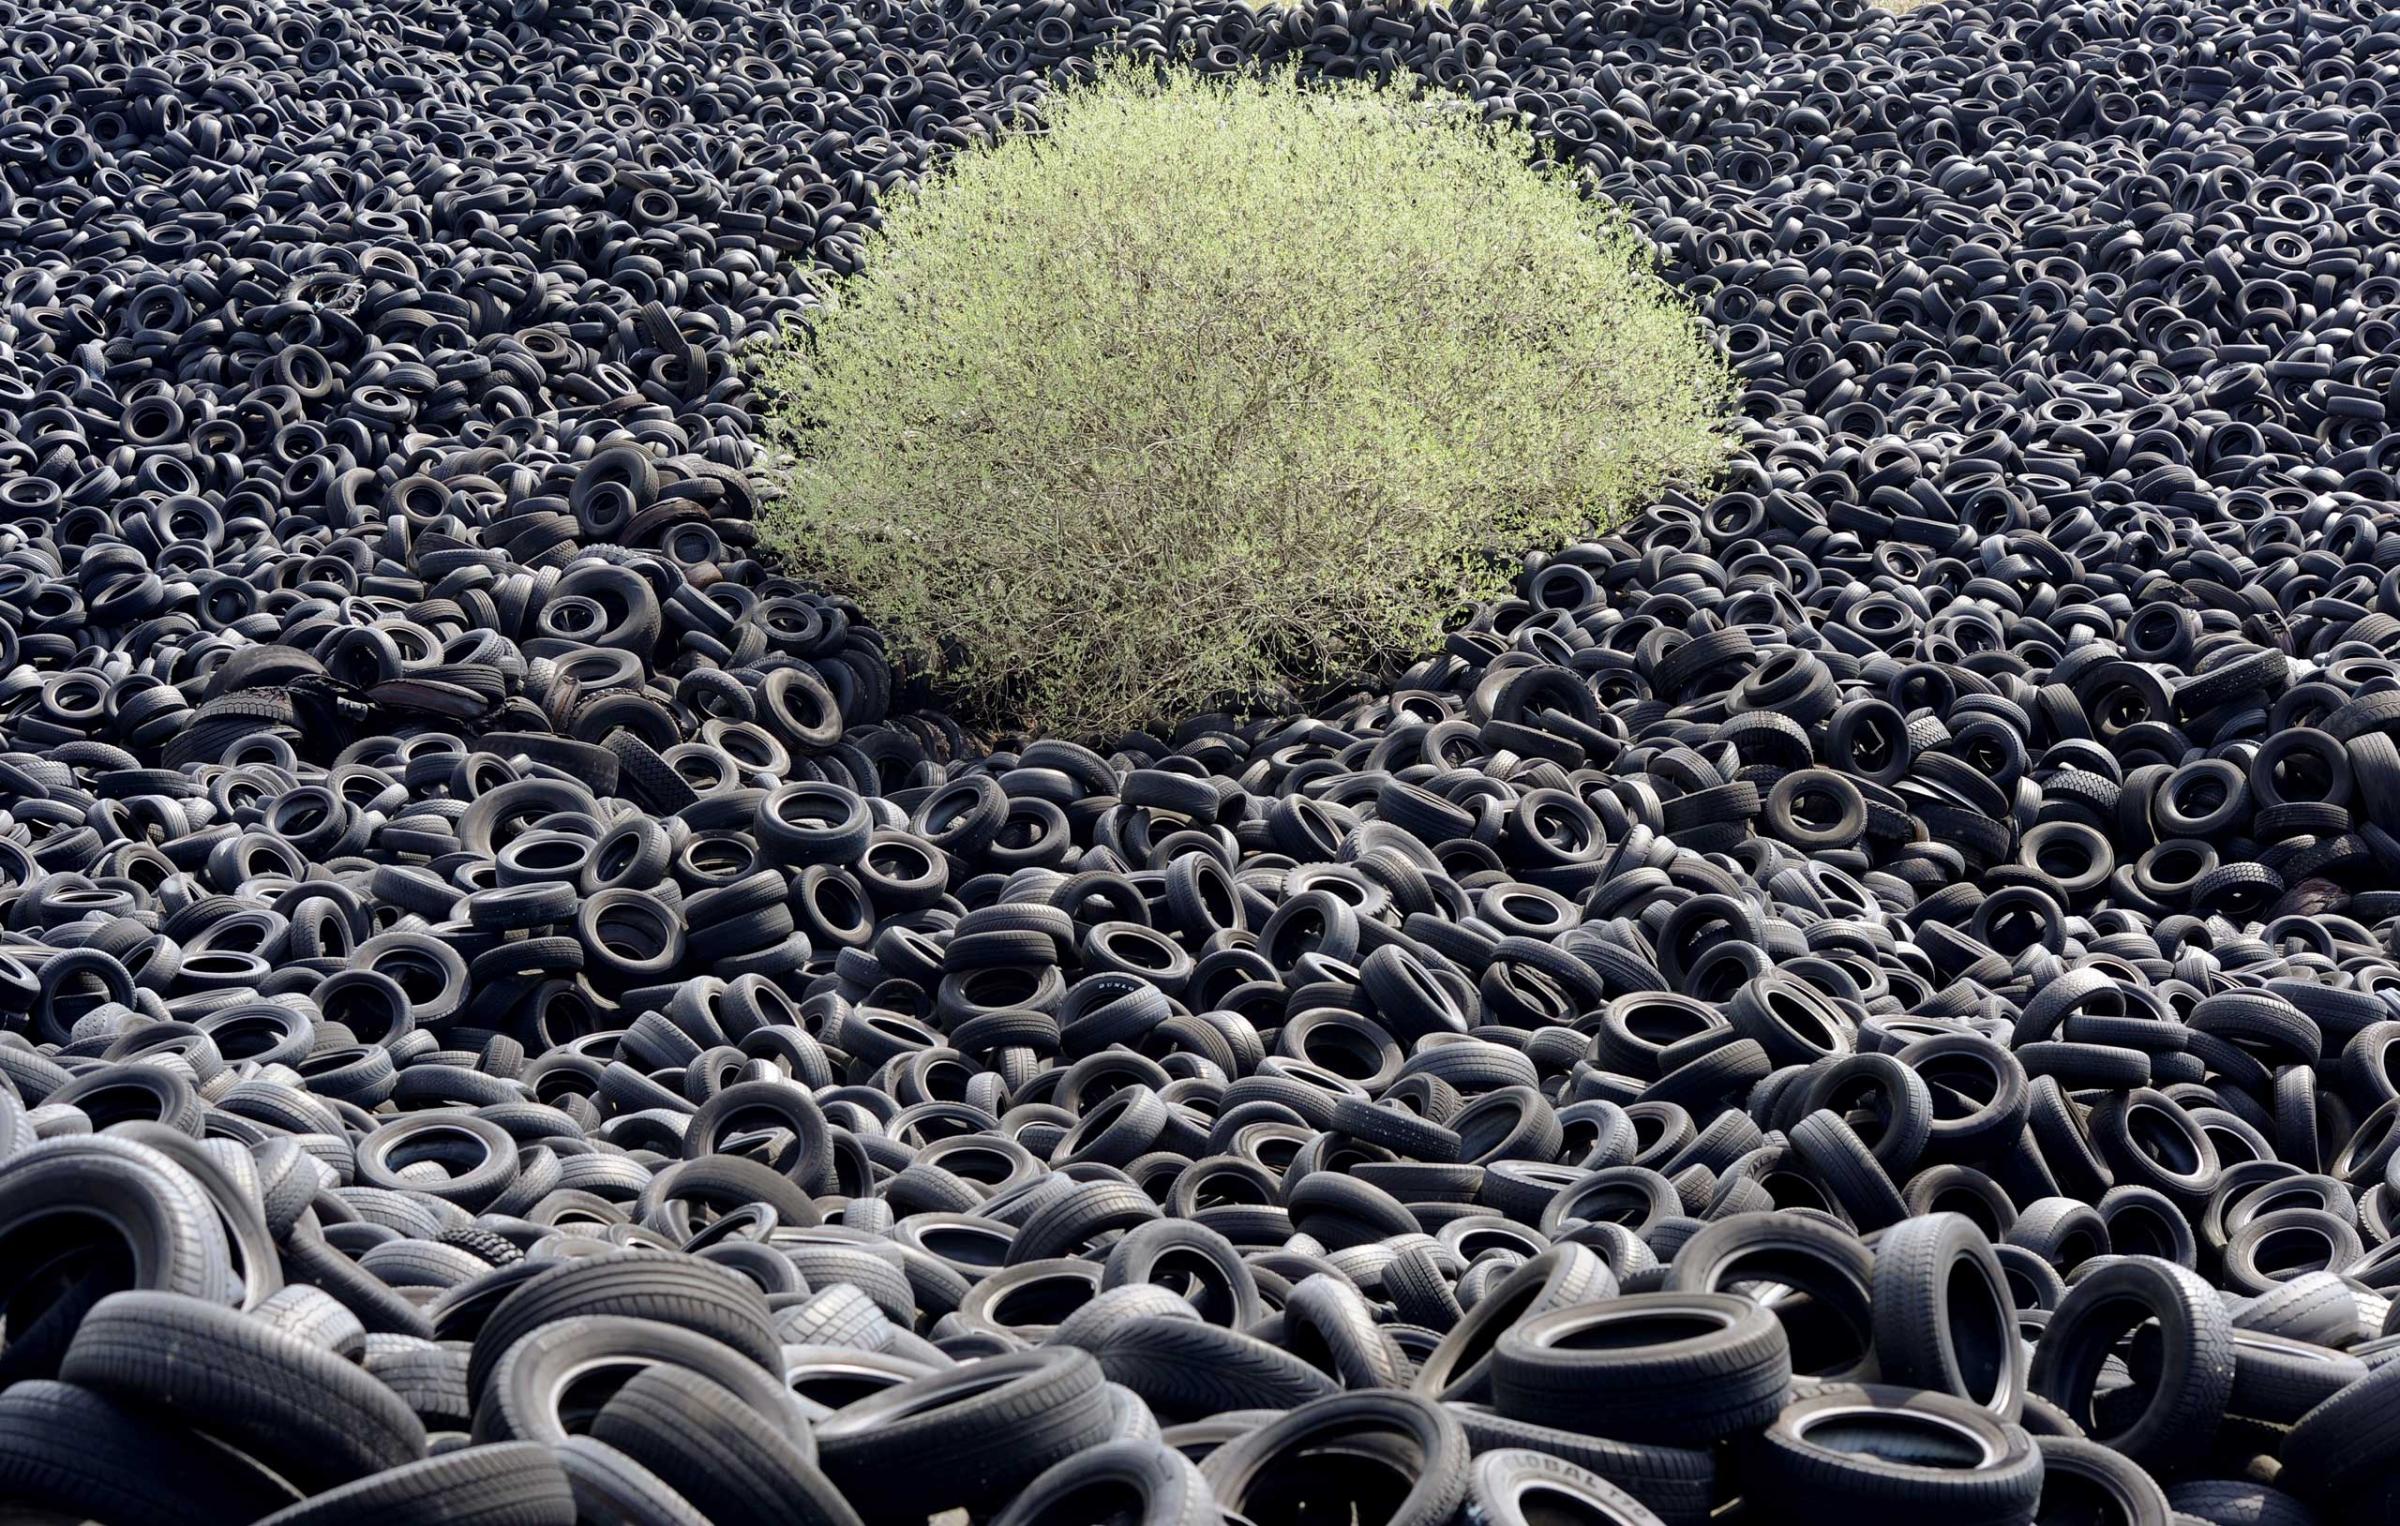 FRANCE-THEME-INDUSTRY-ENVIRONMENT-TYRES-RECYCLING-OFFBEAT